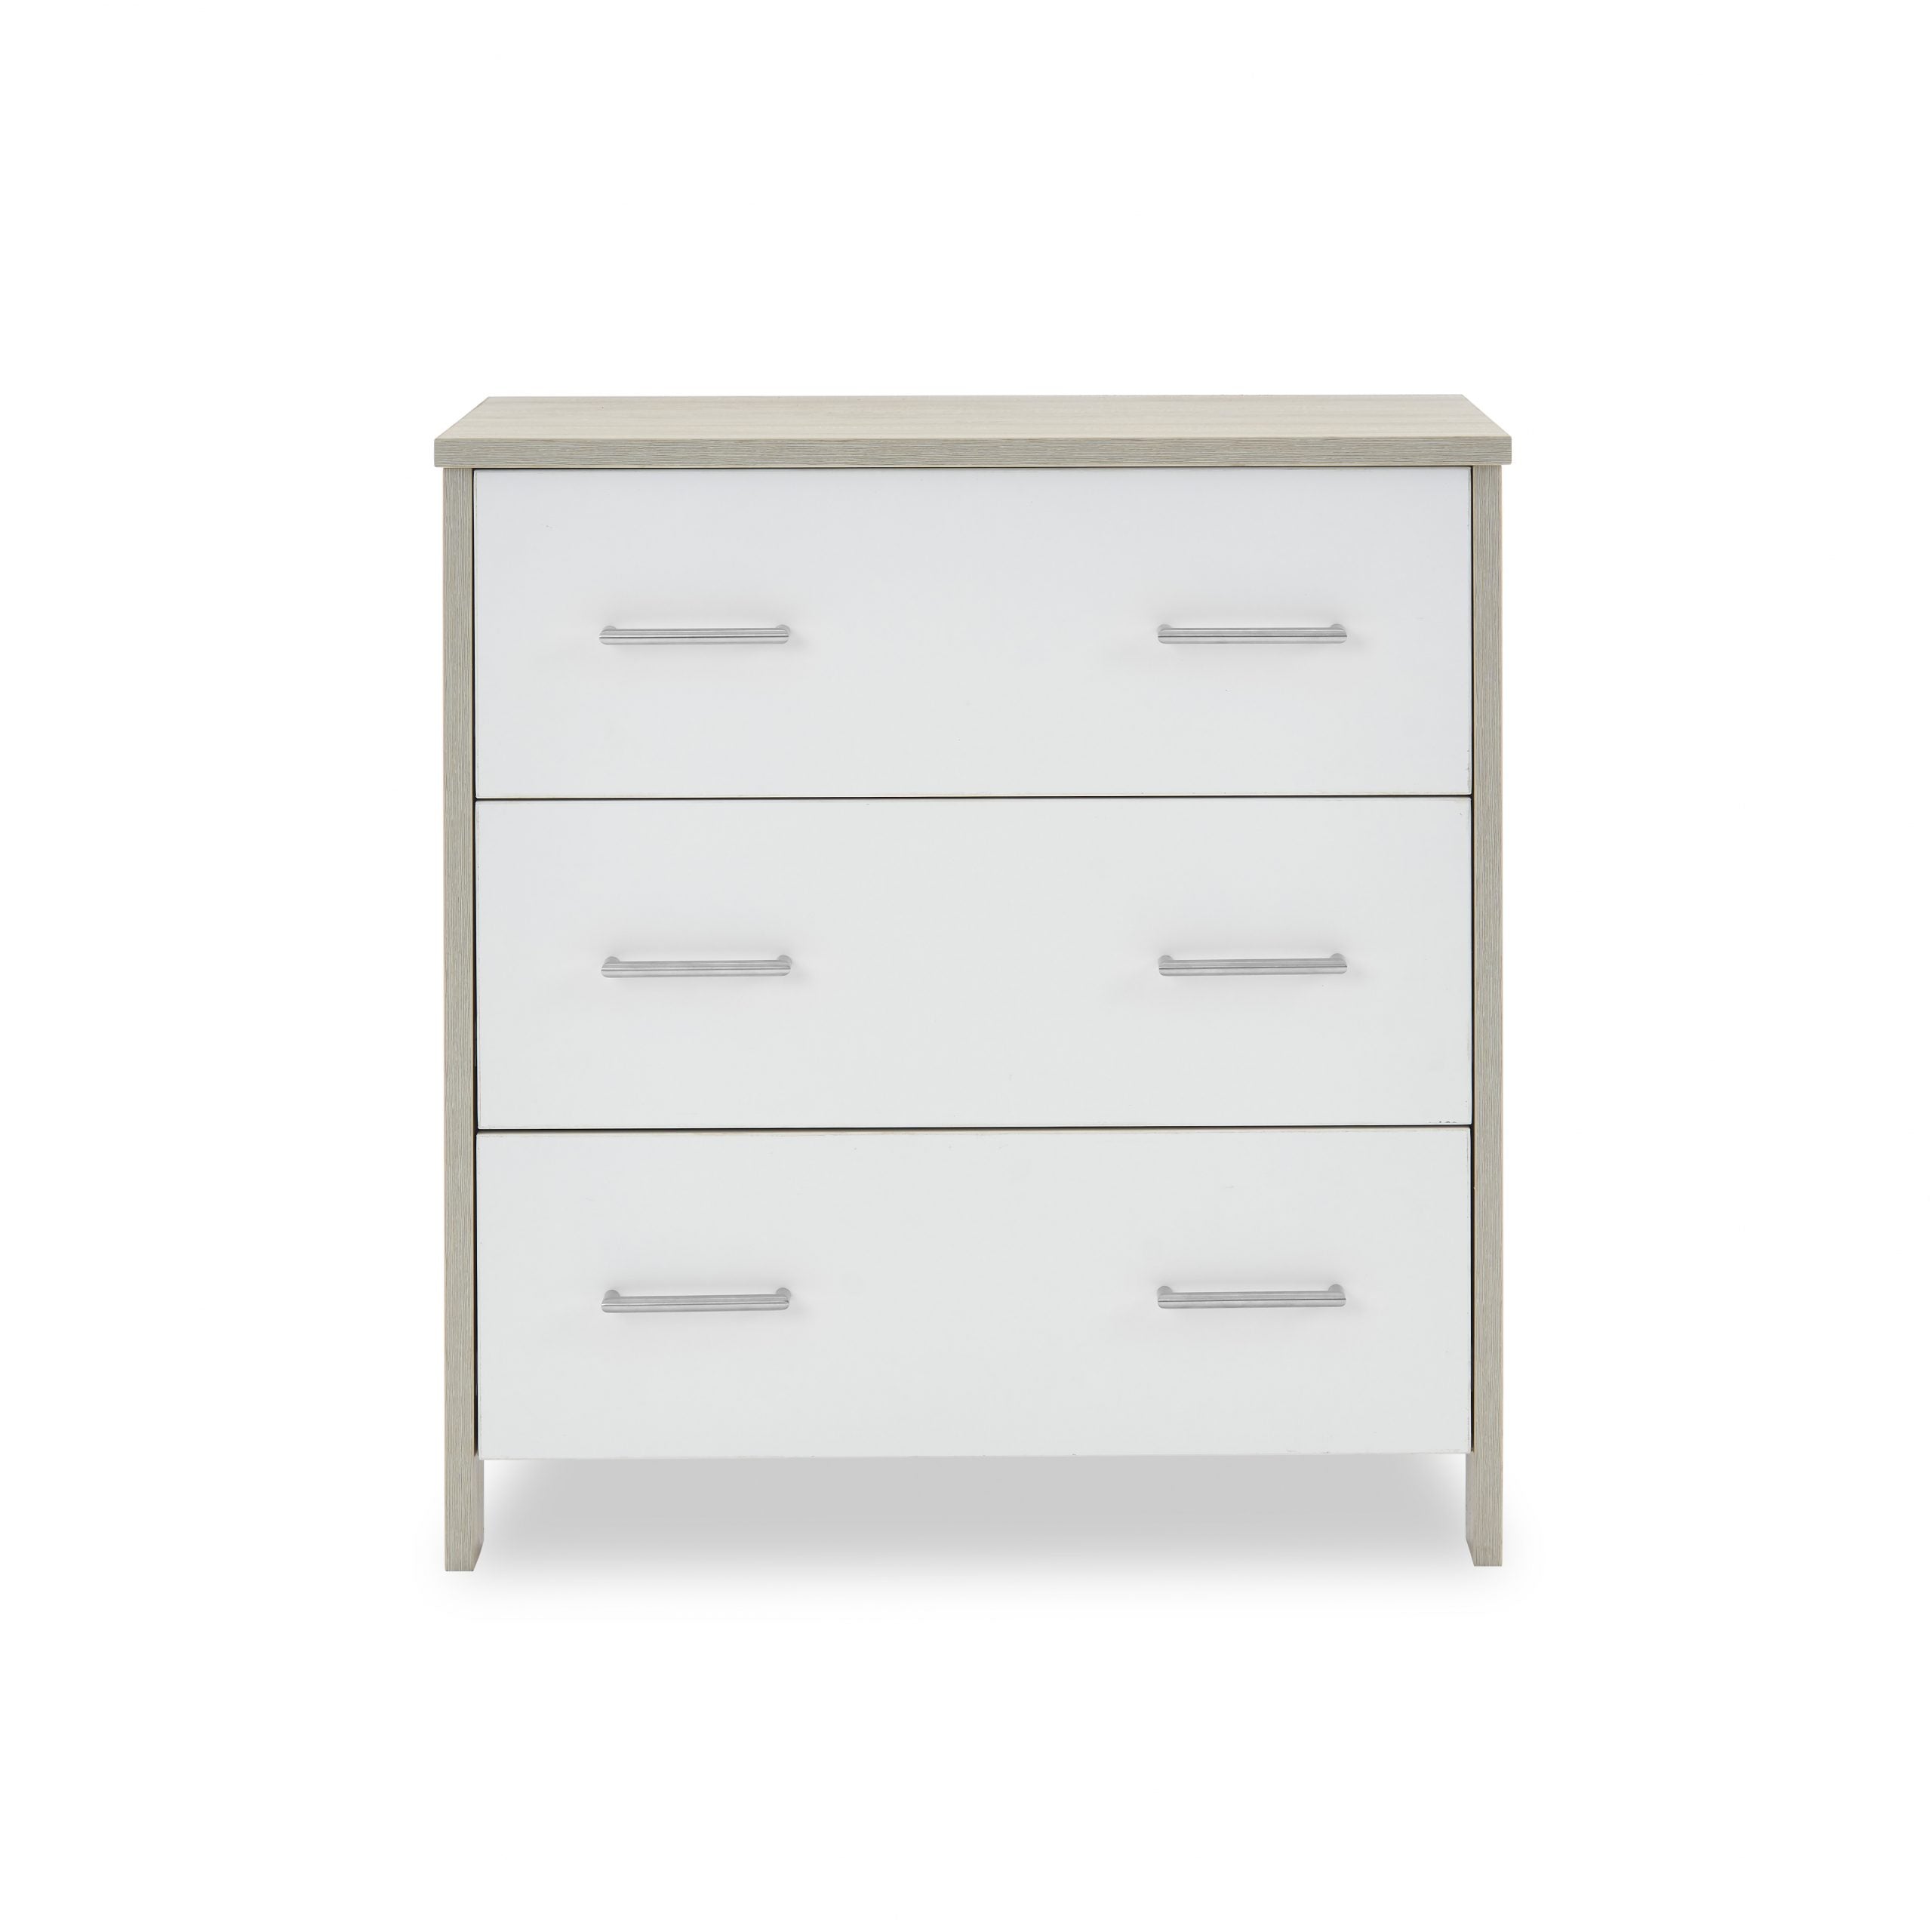 Obaby Nika Closed Changing Unit - Grey Wash with White